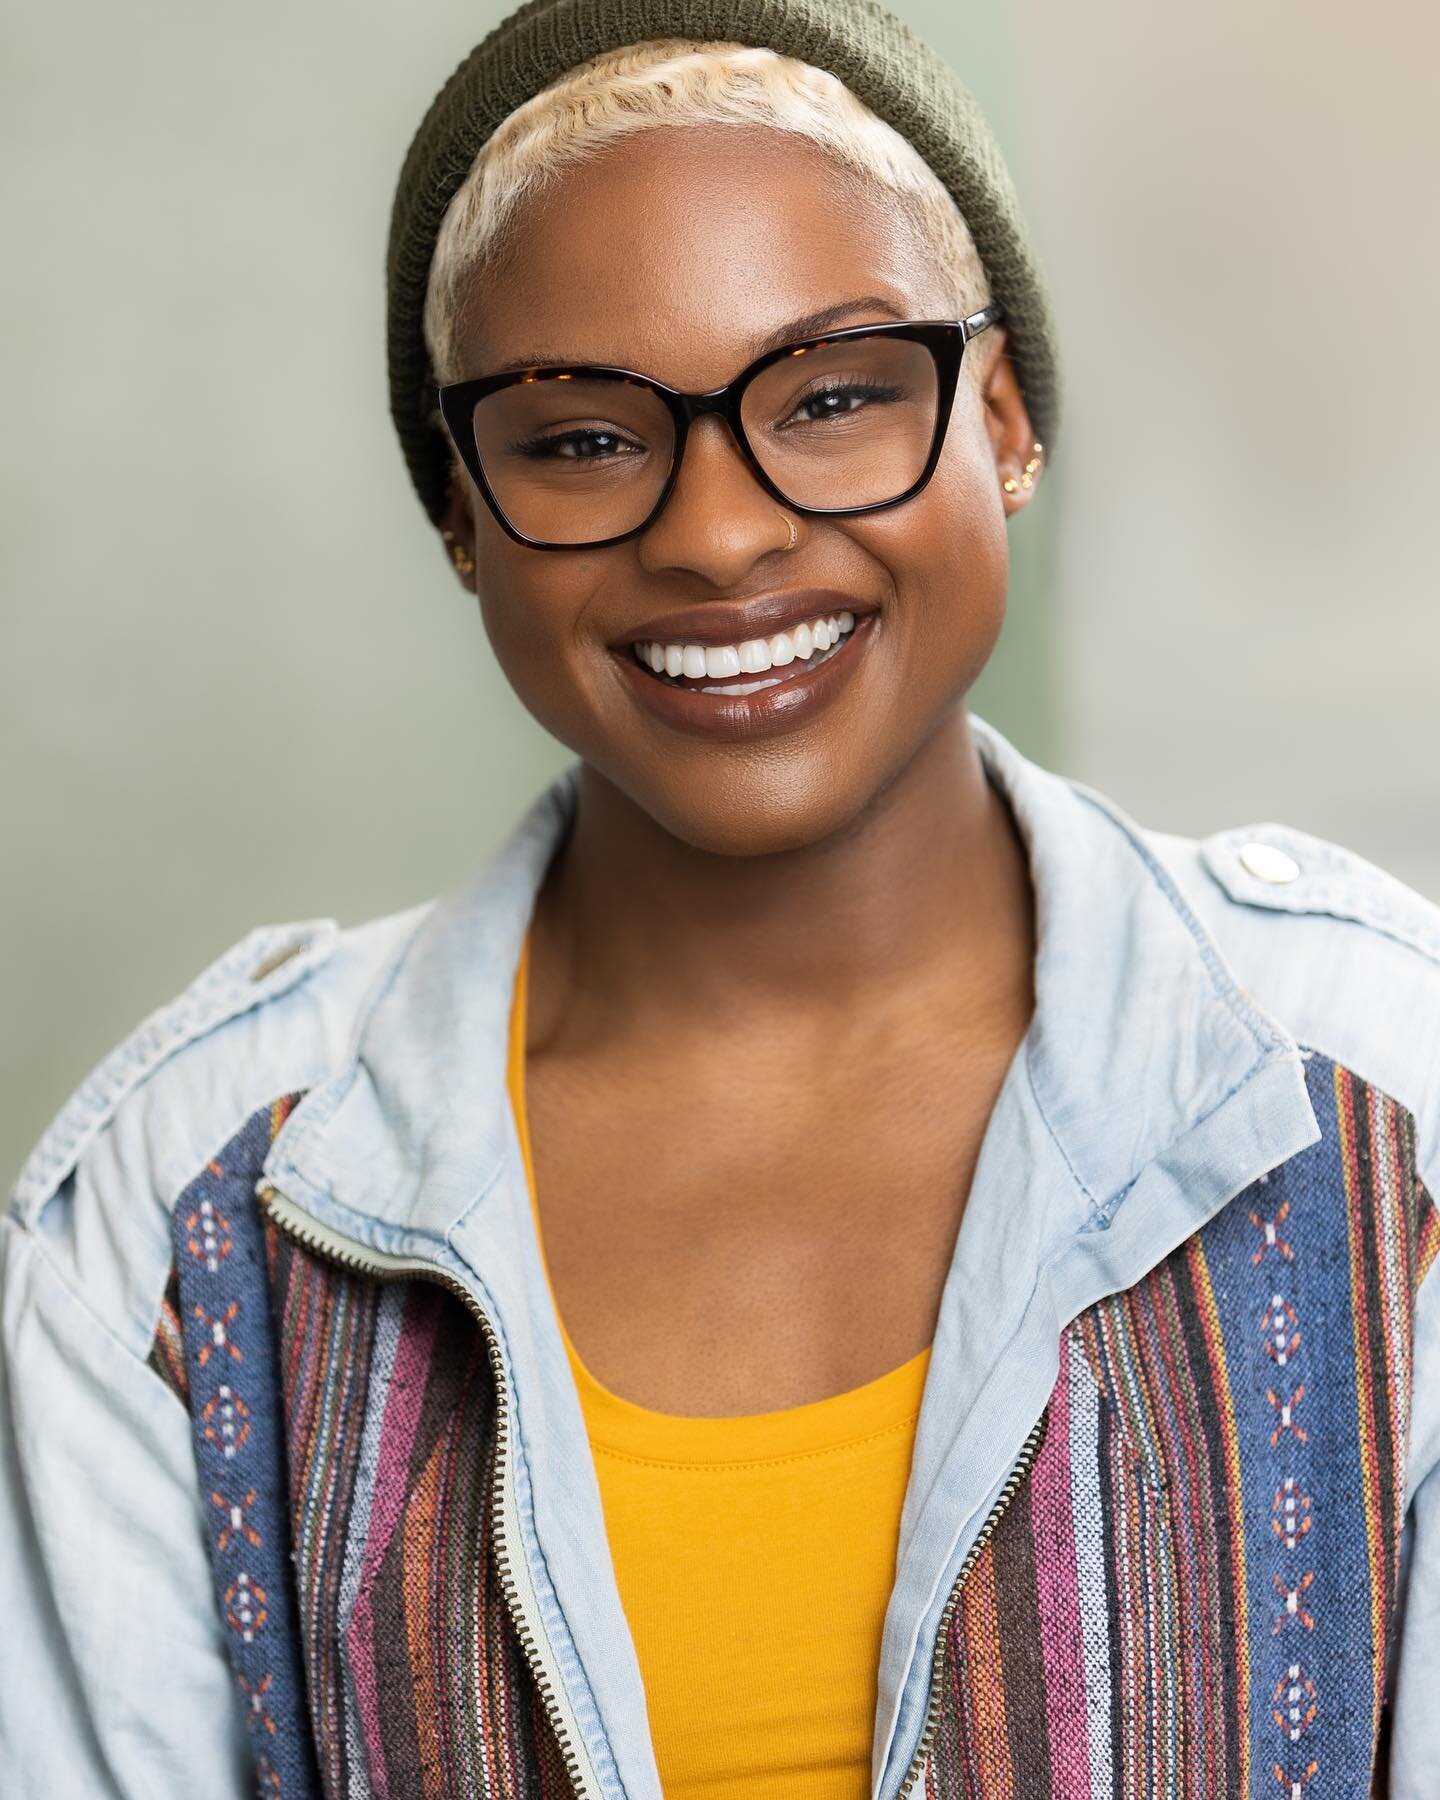 Now, that&rsquo;s a Booking smile! 😁

◾️◾️◾️

Hey Actors! Headshots are one of the key marketing tools for Actors so initially, it&rsquo;s what gets you in the audition room. Headshots should outline your look, style, and personality. 

We have a pr